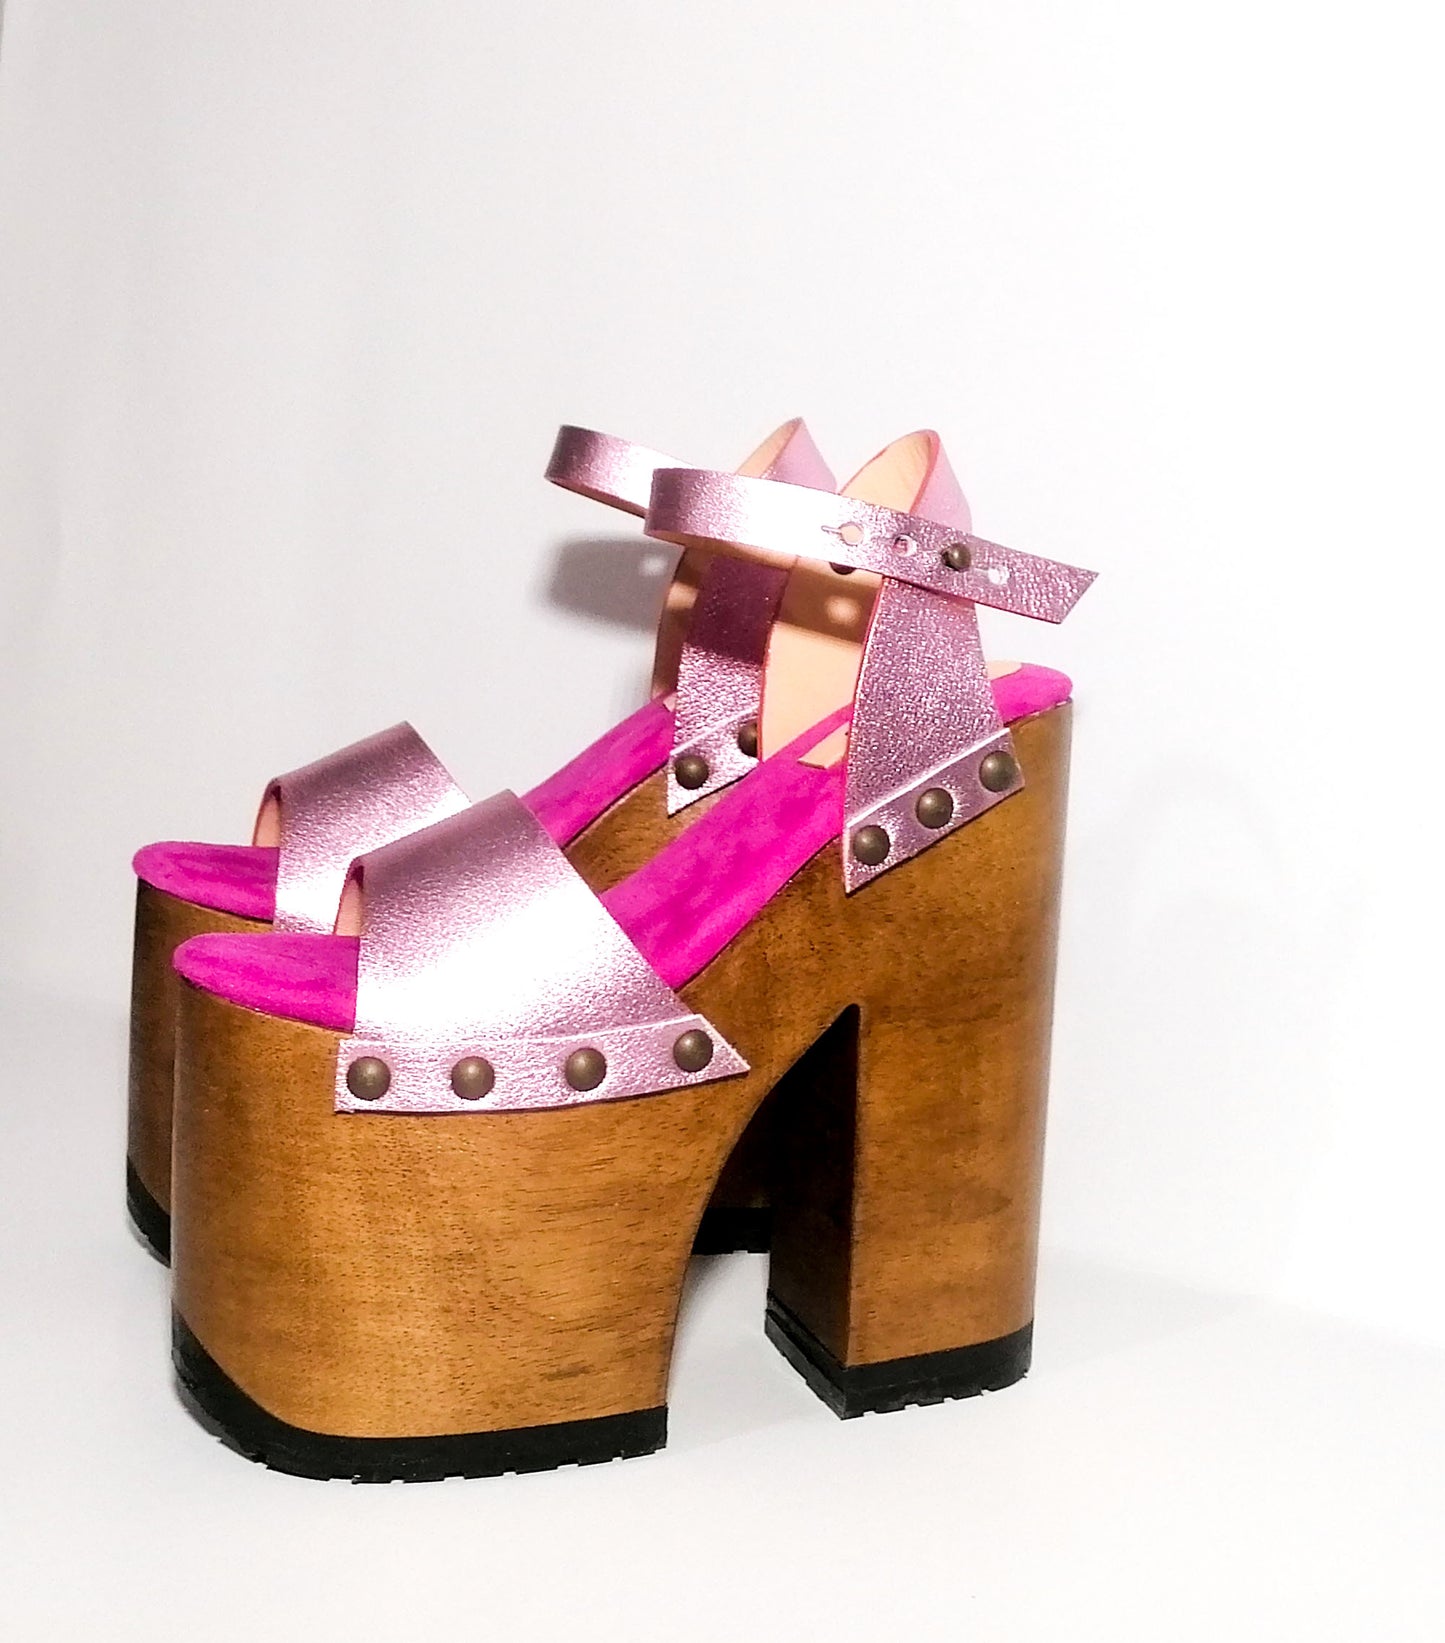 Vintage style platform sandals with super high wooden heels, made in leather. Sizes 34 to 47. Super high wooden heels inspired by the 70s. Exclusive handmade design. High quality footwear handmade by sol Caleyo.